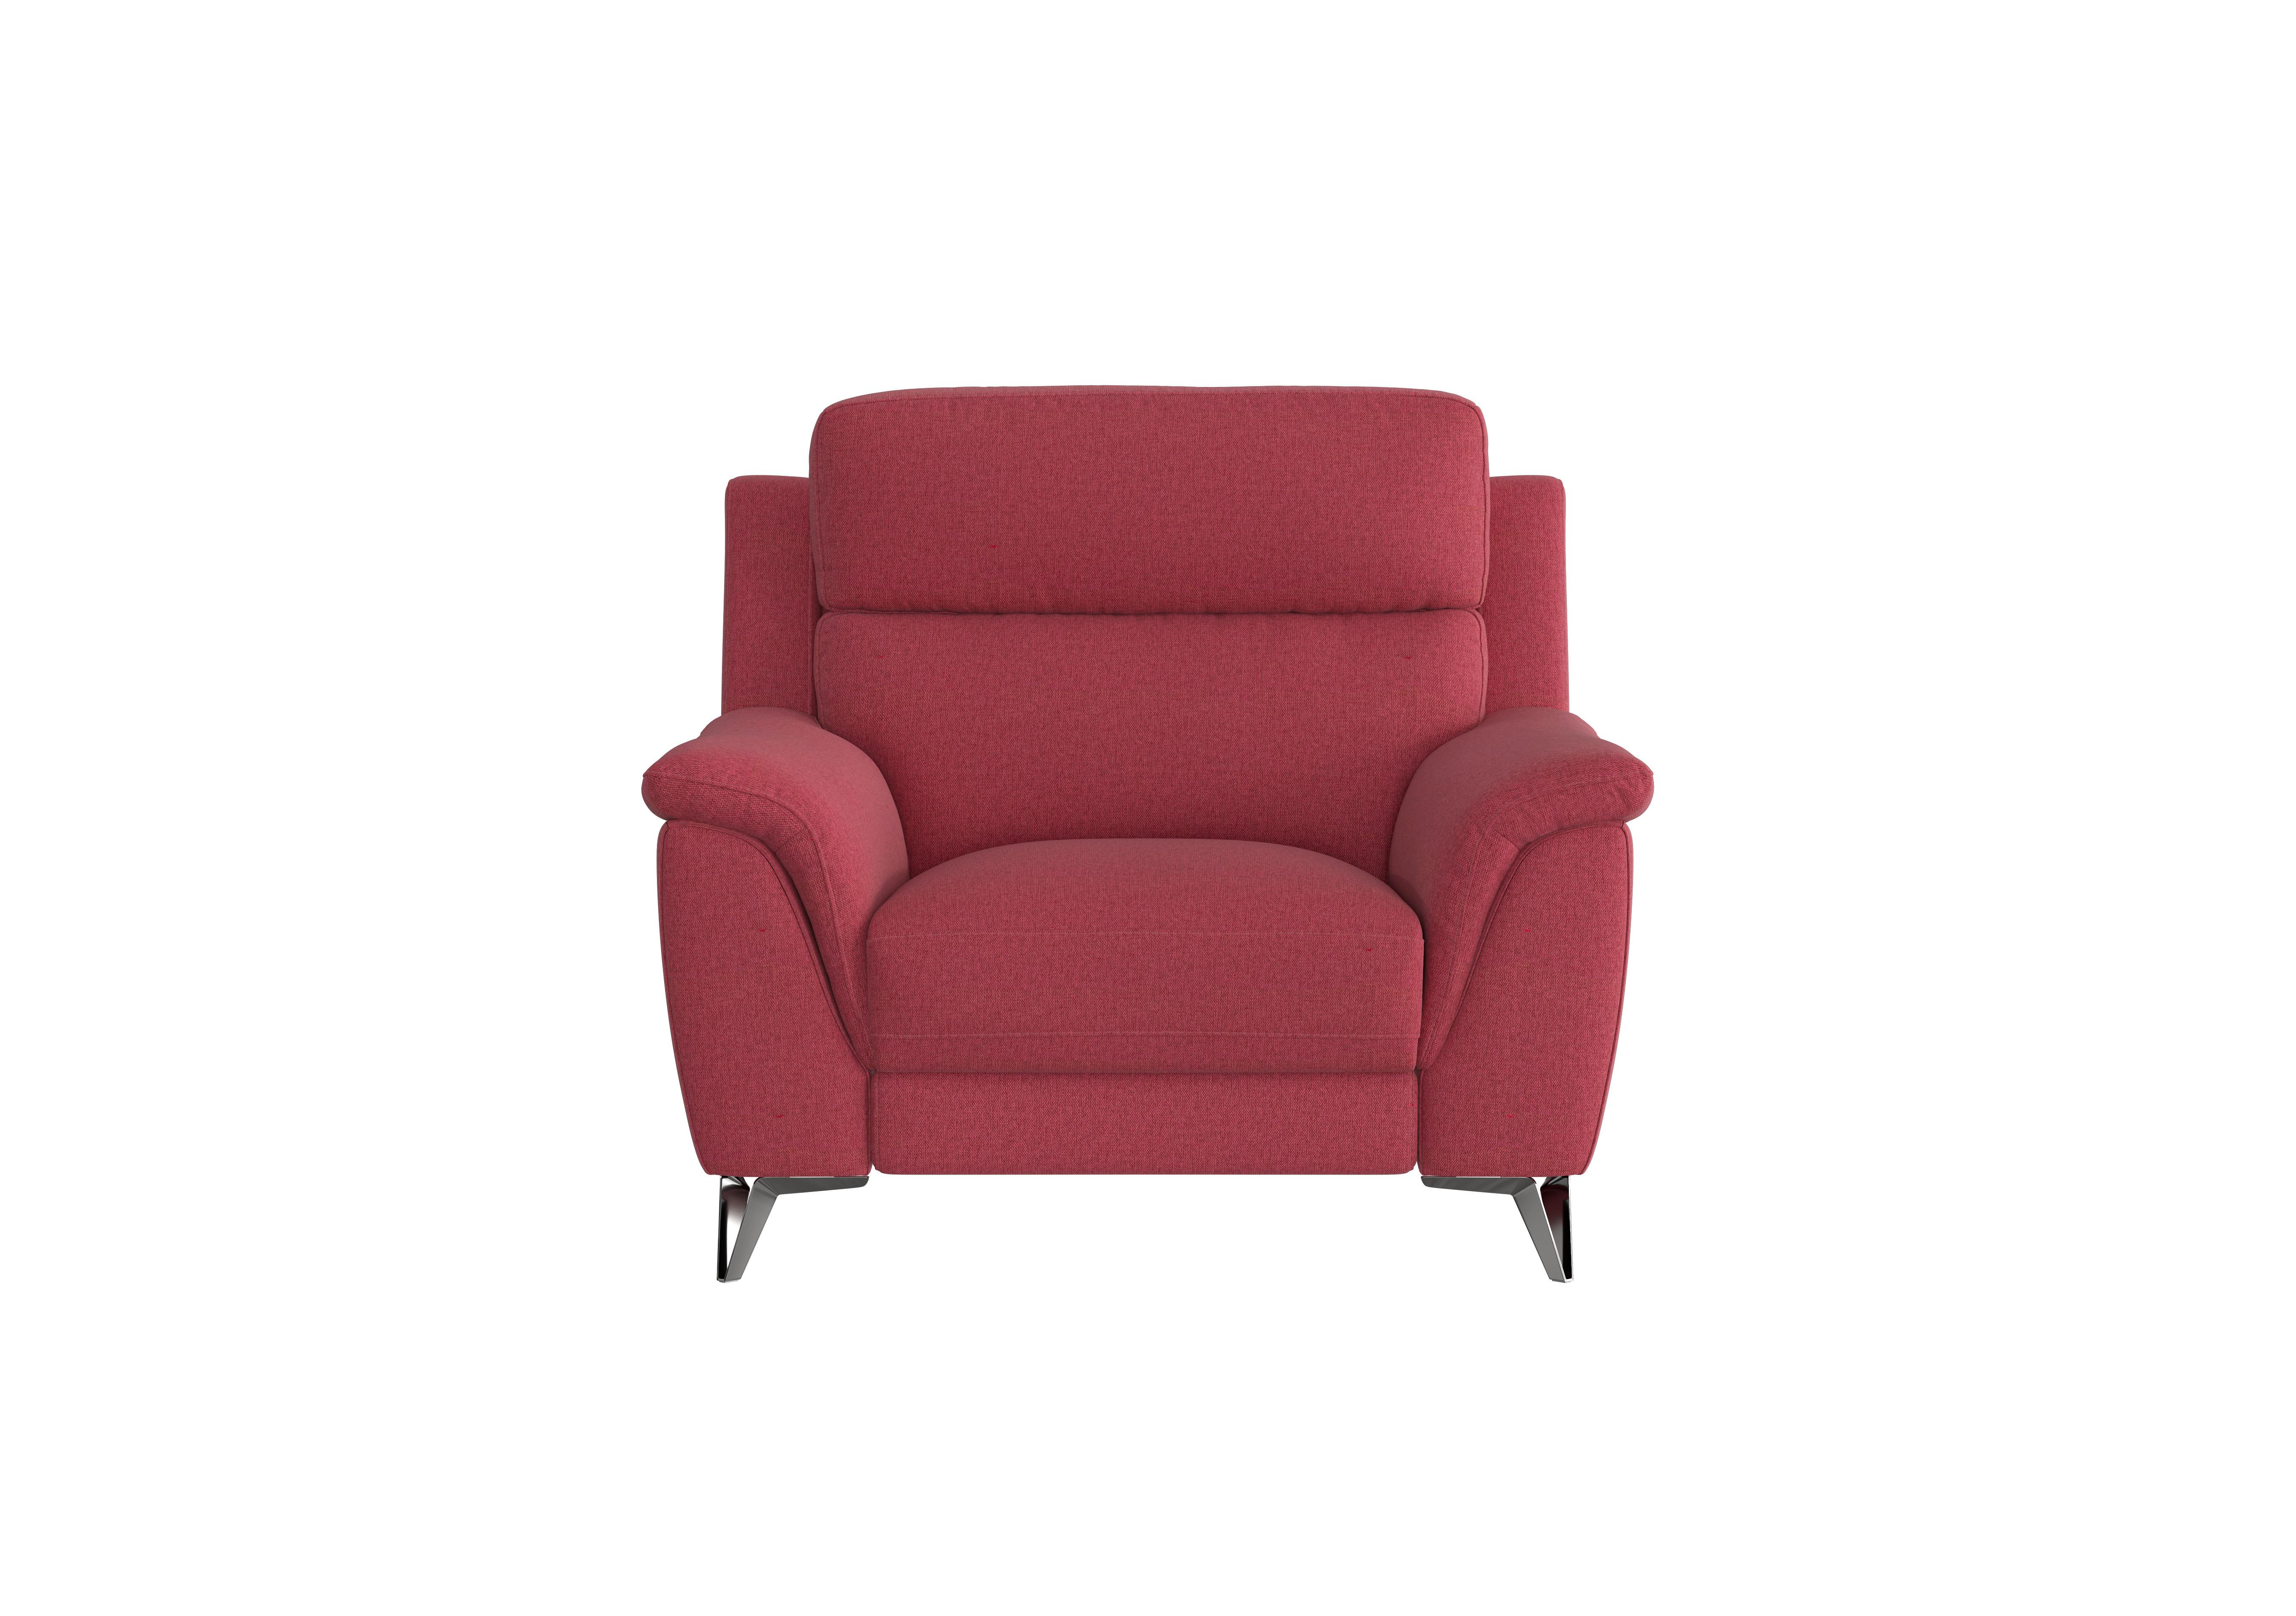 Contempo Fabric Armchair in Fab-Blt-R29 Red on Furniture Village